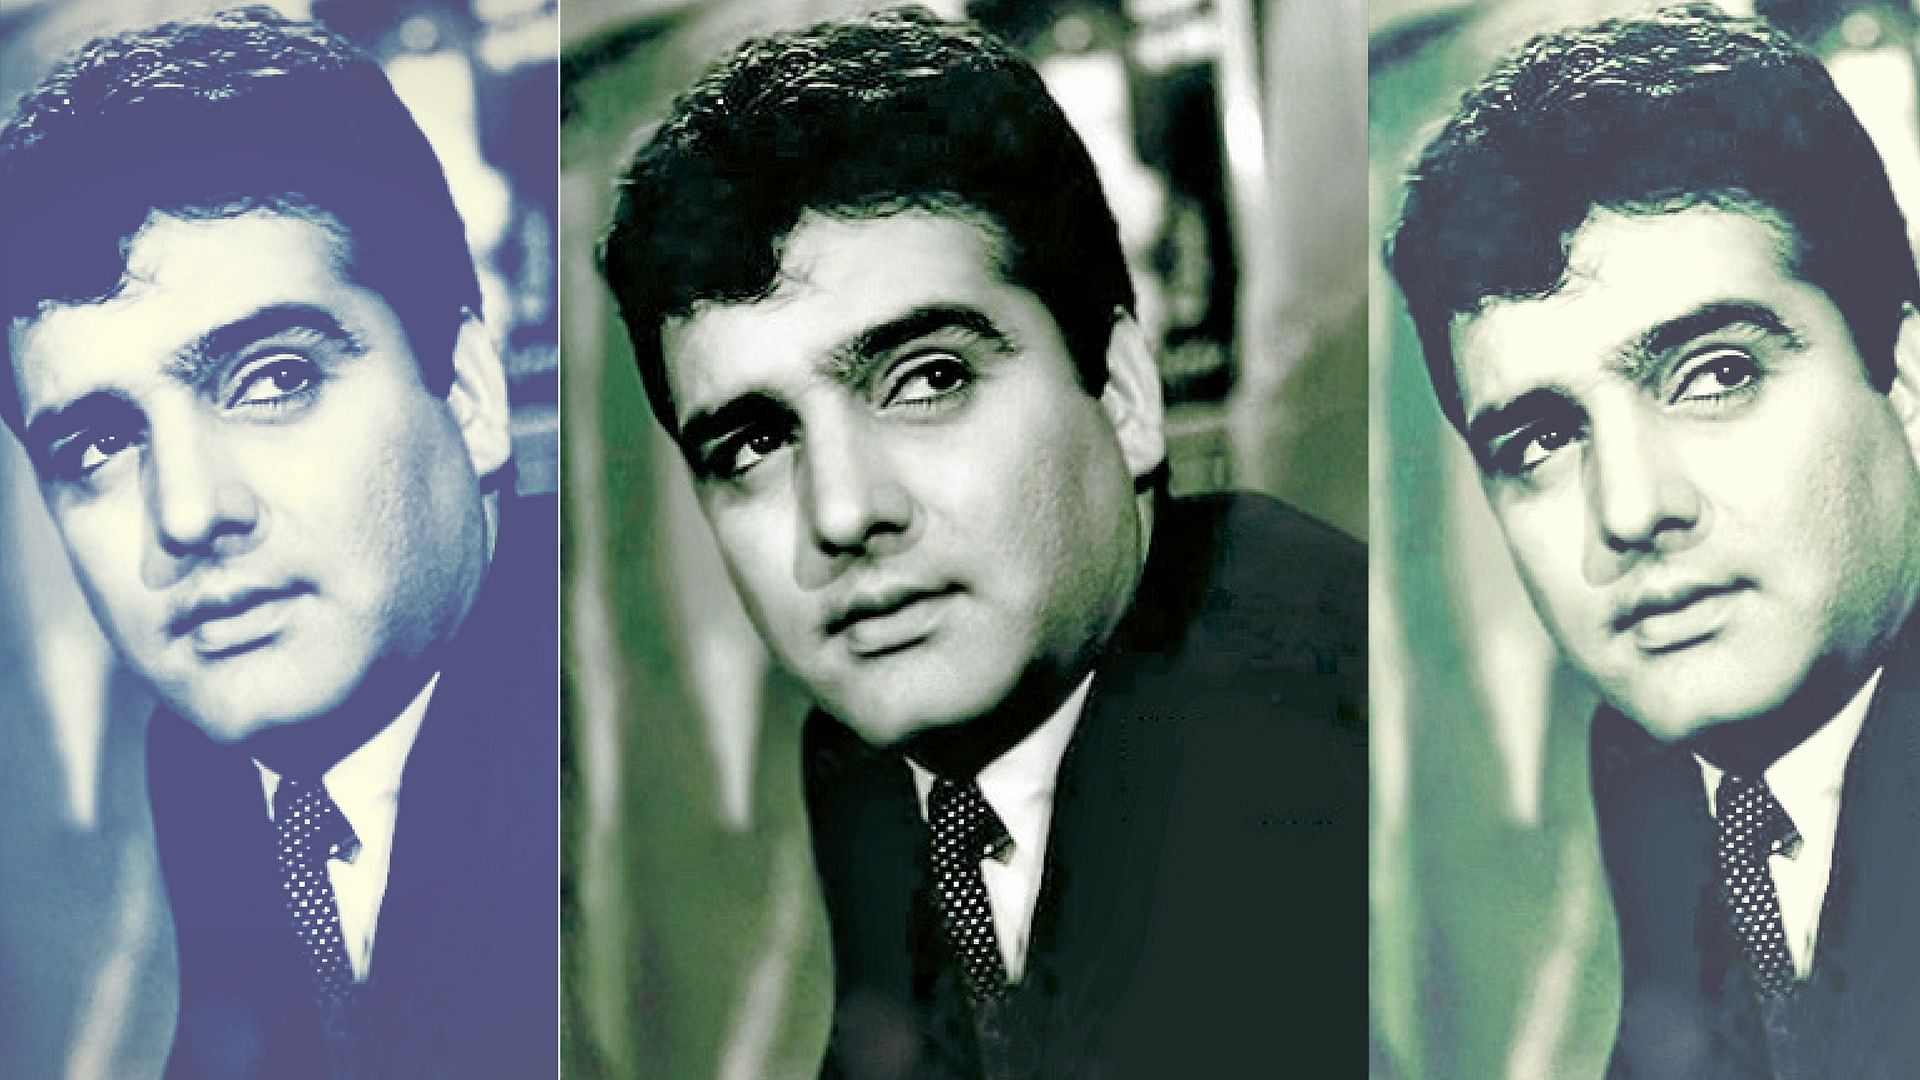 

Feroz Khan is one of the most flamboyant actors in Bollywood. (Photo courtesy: <a href="https://www.facebook.com/Imprints-and-Images-of-Indian-Film-Music-391149464326895/">Facebook/ imprintsandimages</a>)